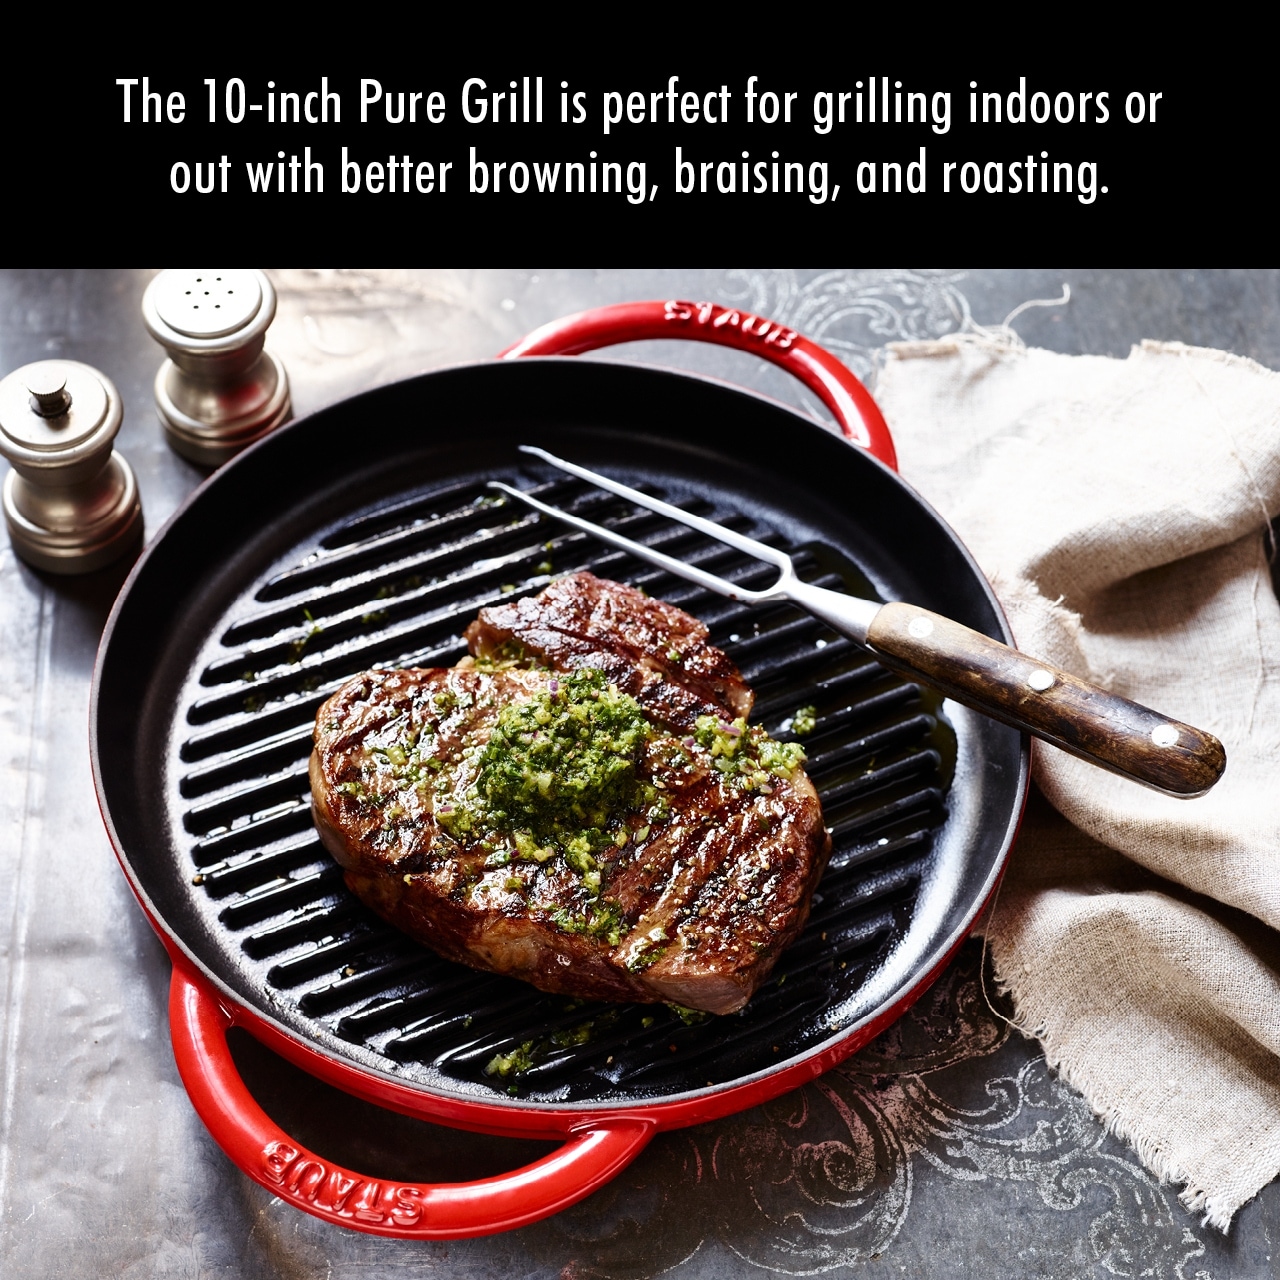 https://ak1.ostkcdn.com/images/products/is/images/direct/5faf742c22ba54305011ff0c9b8dd5f75b2278e3/Staub-Cast-Iron-10-inch-Pure-Grill.jpg